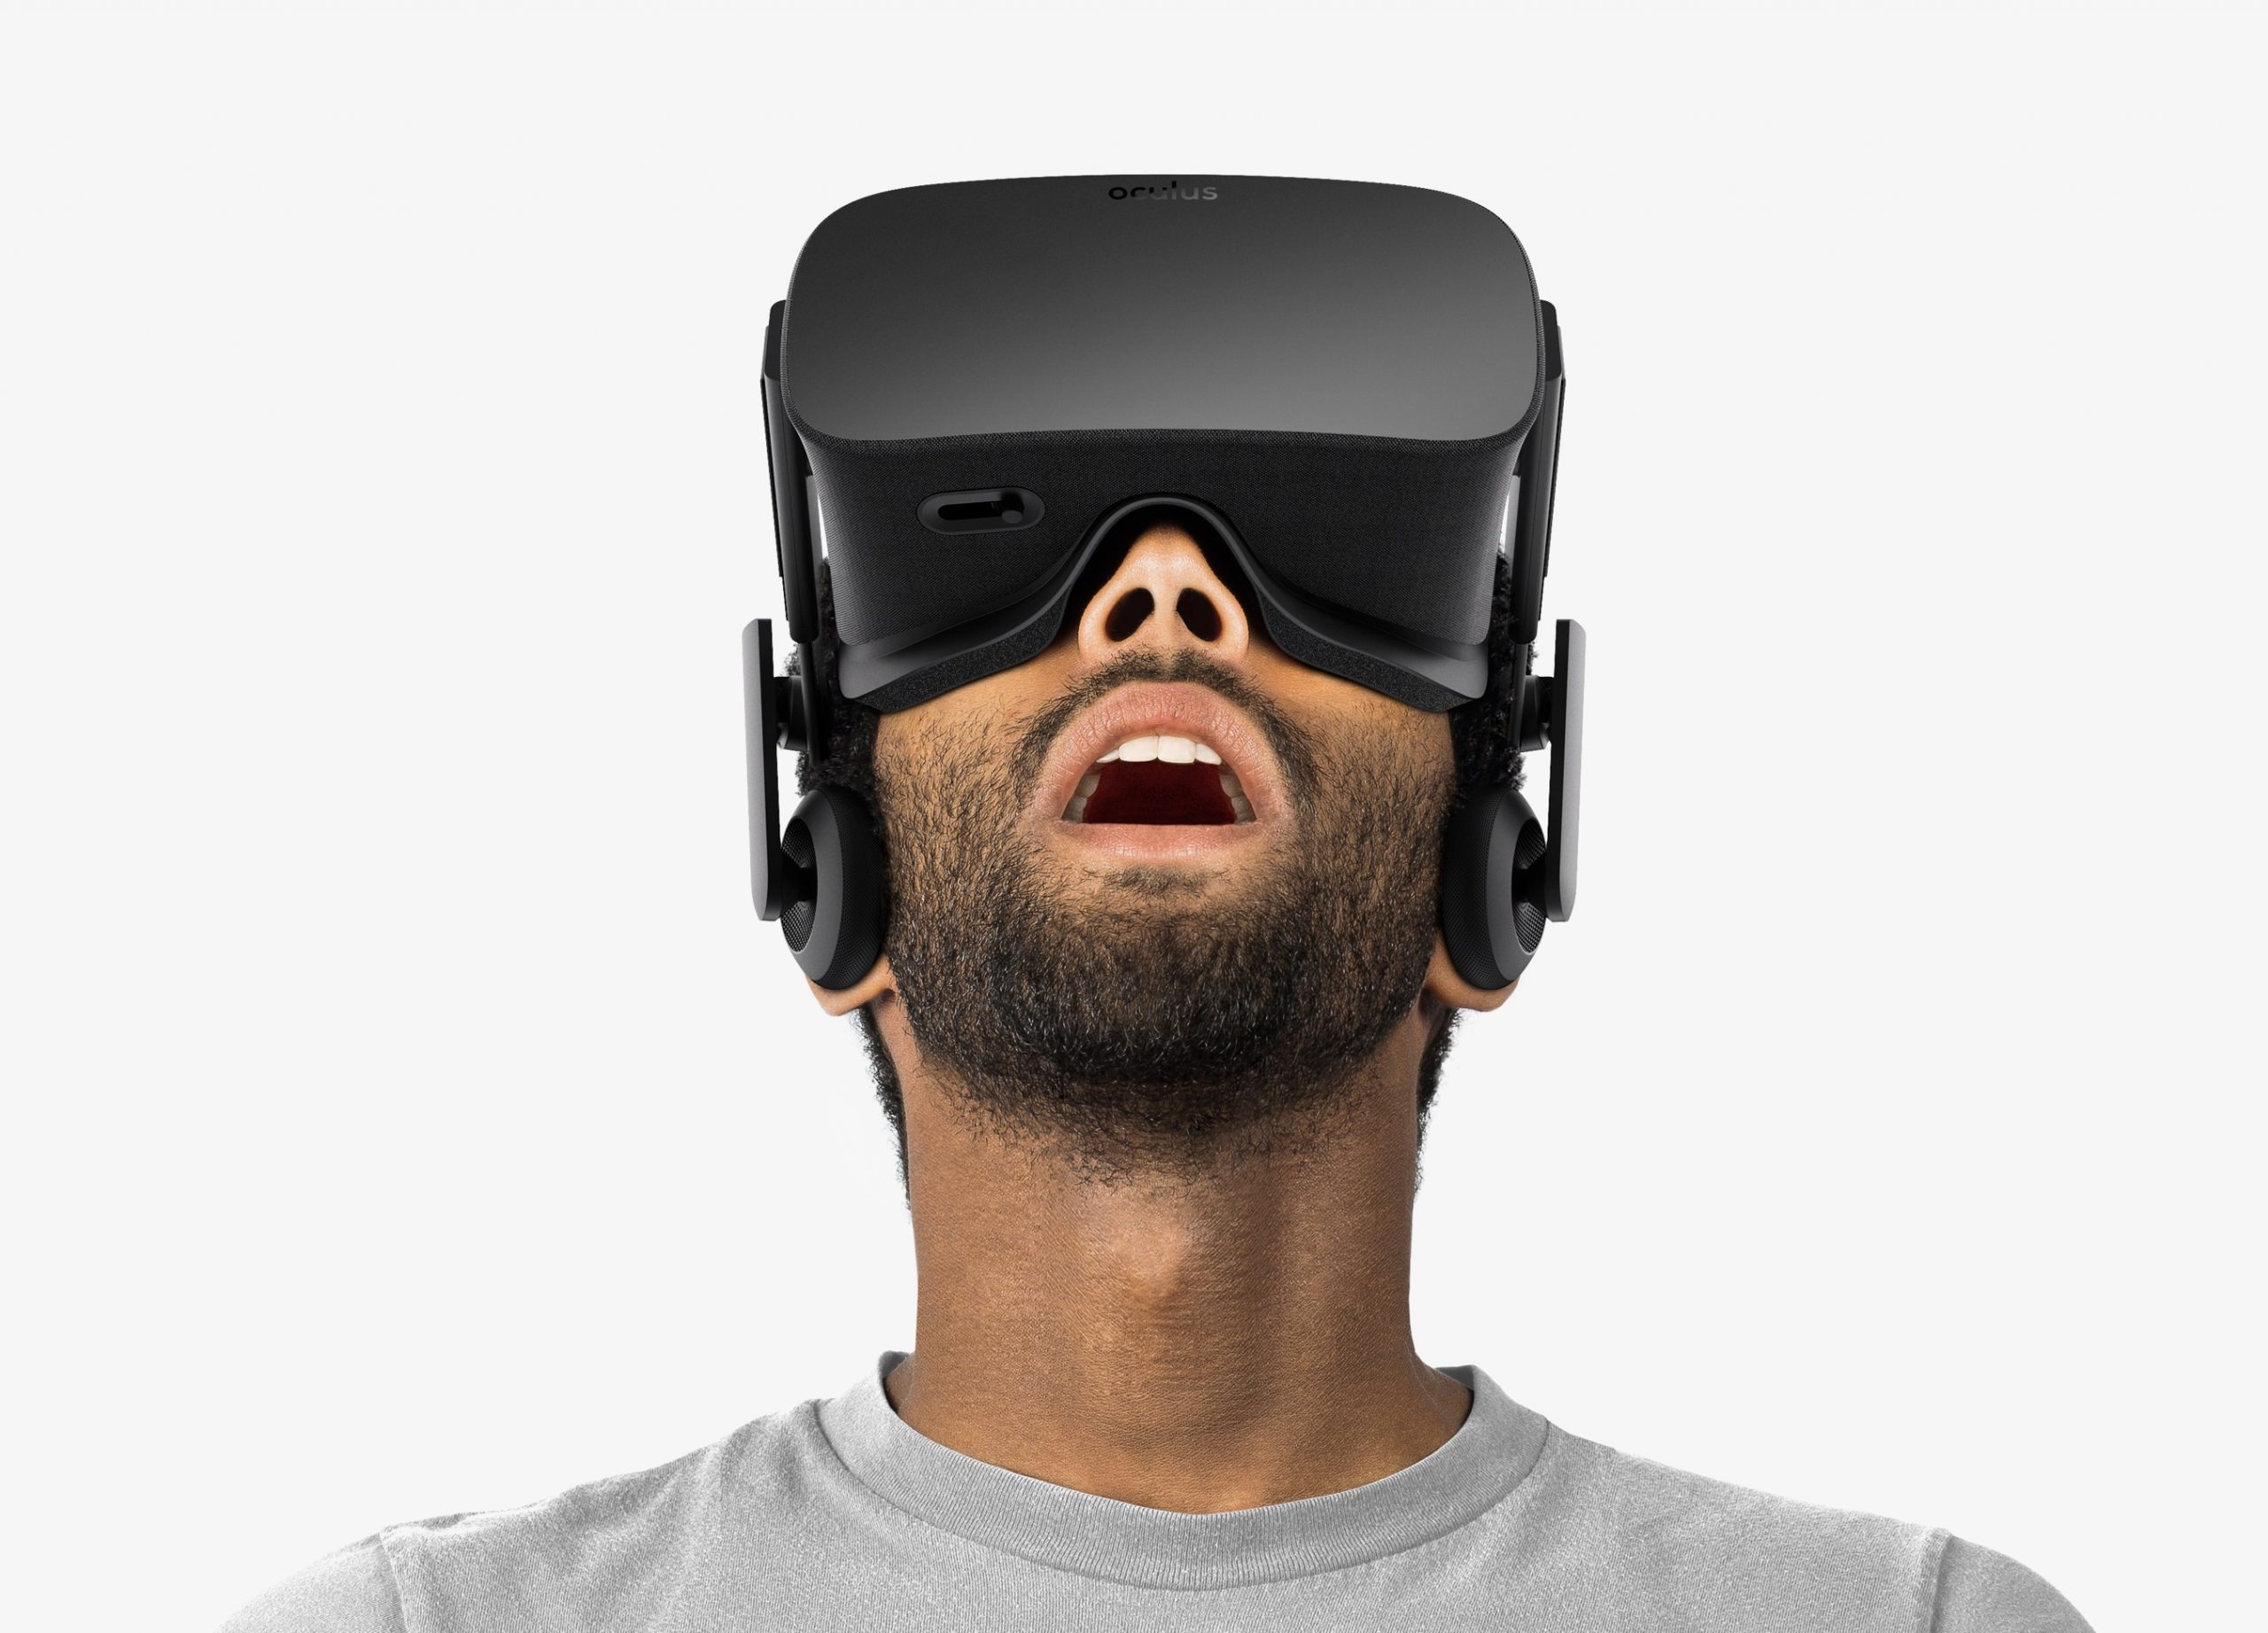 How Much Will The Oculus Rift Cost?